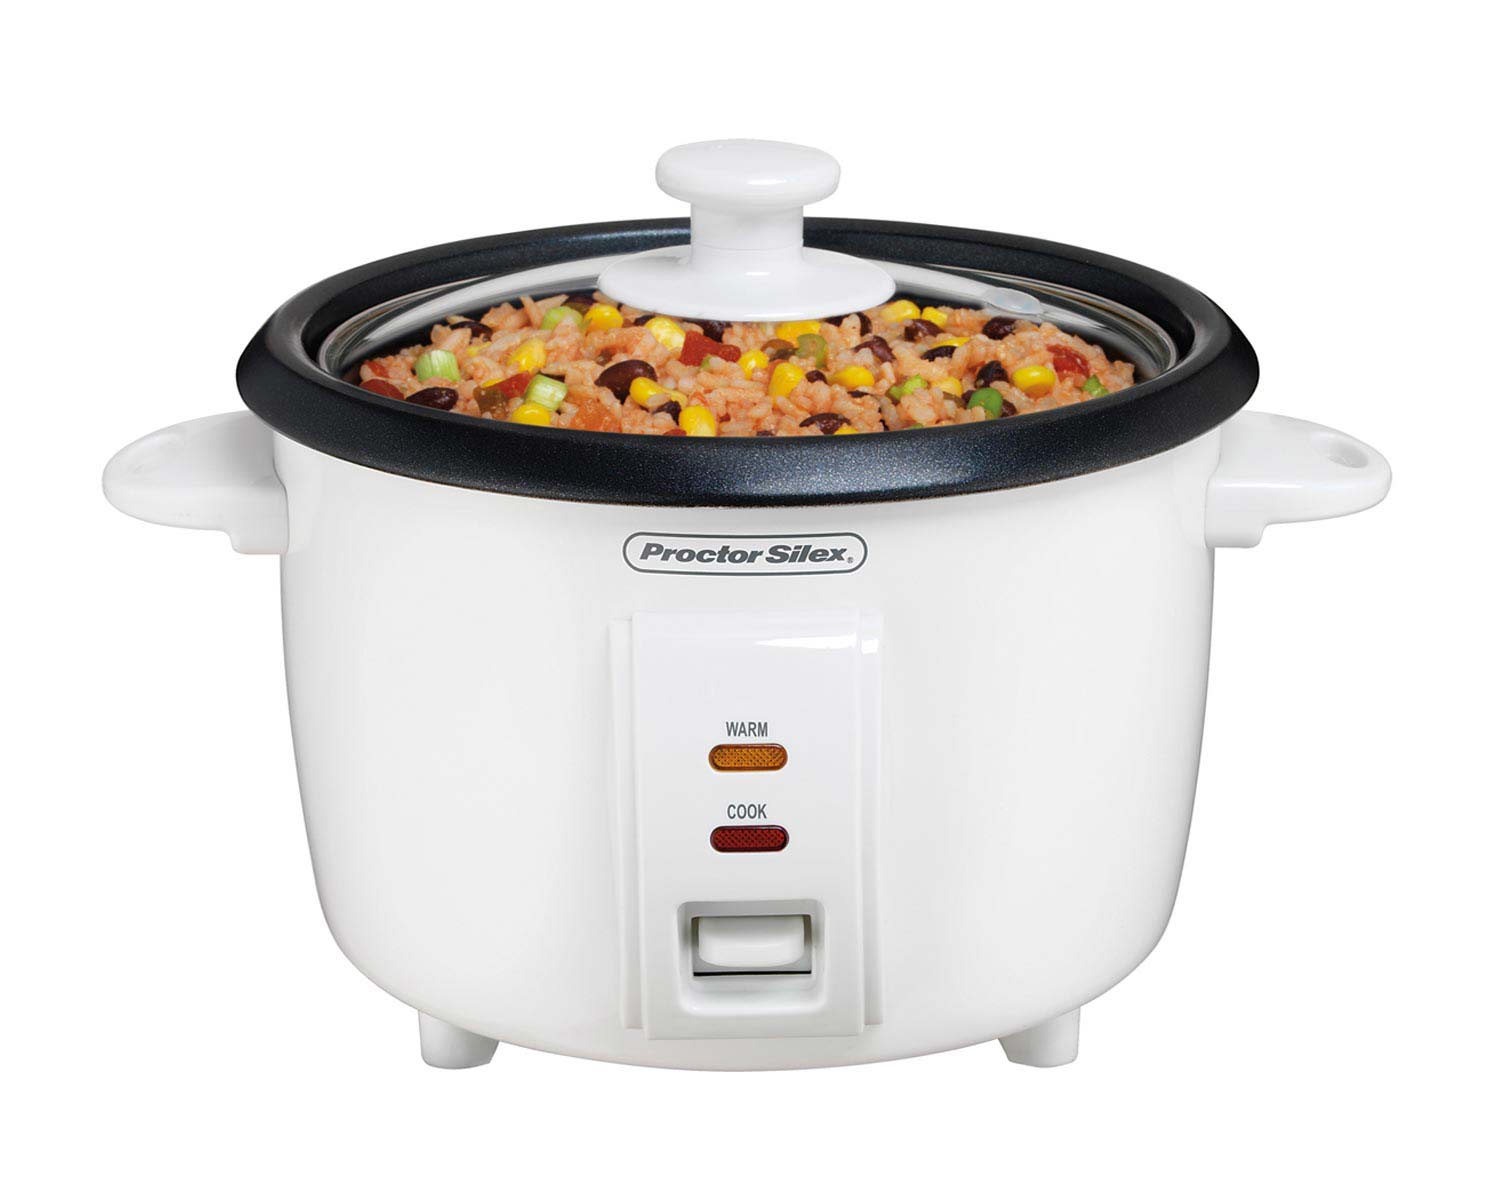 DUPE: 8 Cup Capacity (Cooked) Rice Cooker-37534NR Small Size